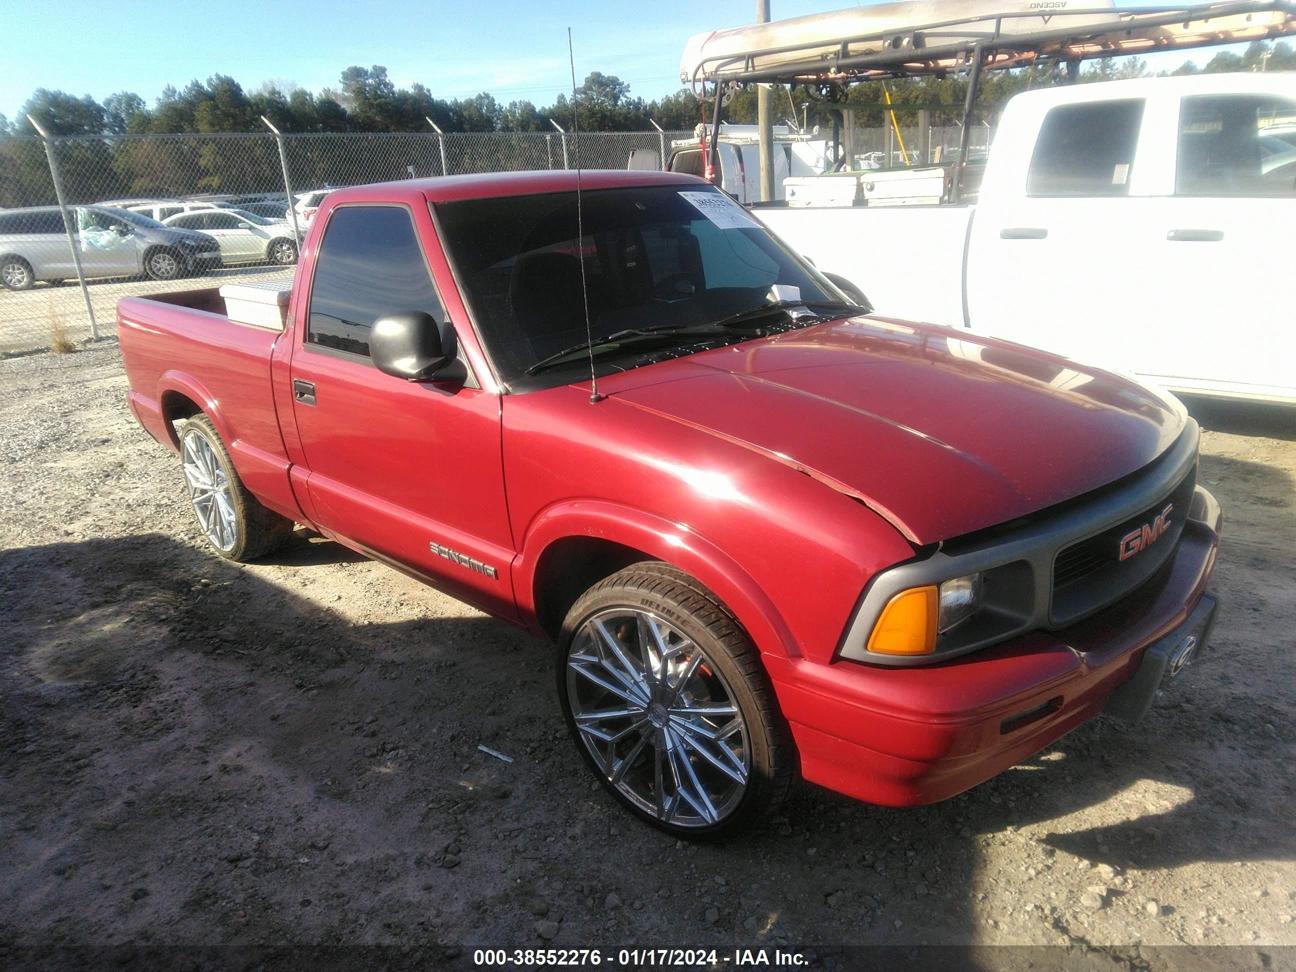 vin: 1GTCS1446VK506468 1GTCS1446VK506468 1997 gmc sonoma 4300 for Sale in 31326, 348 Commerce Dr, Rincon, USA